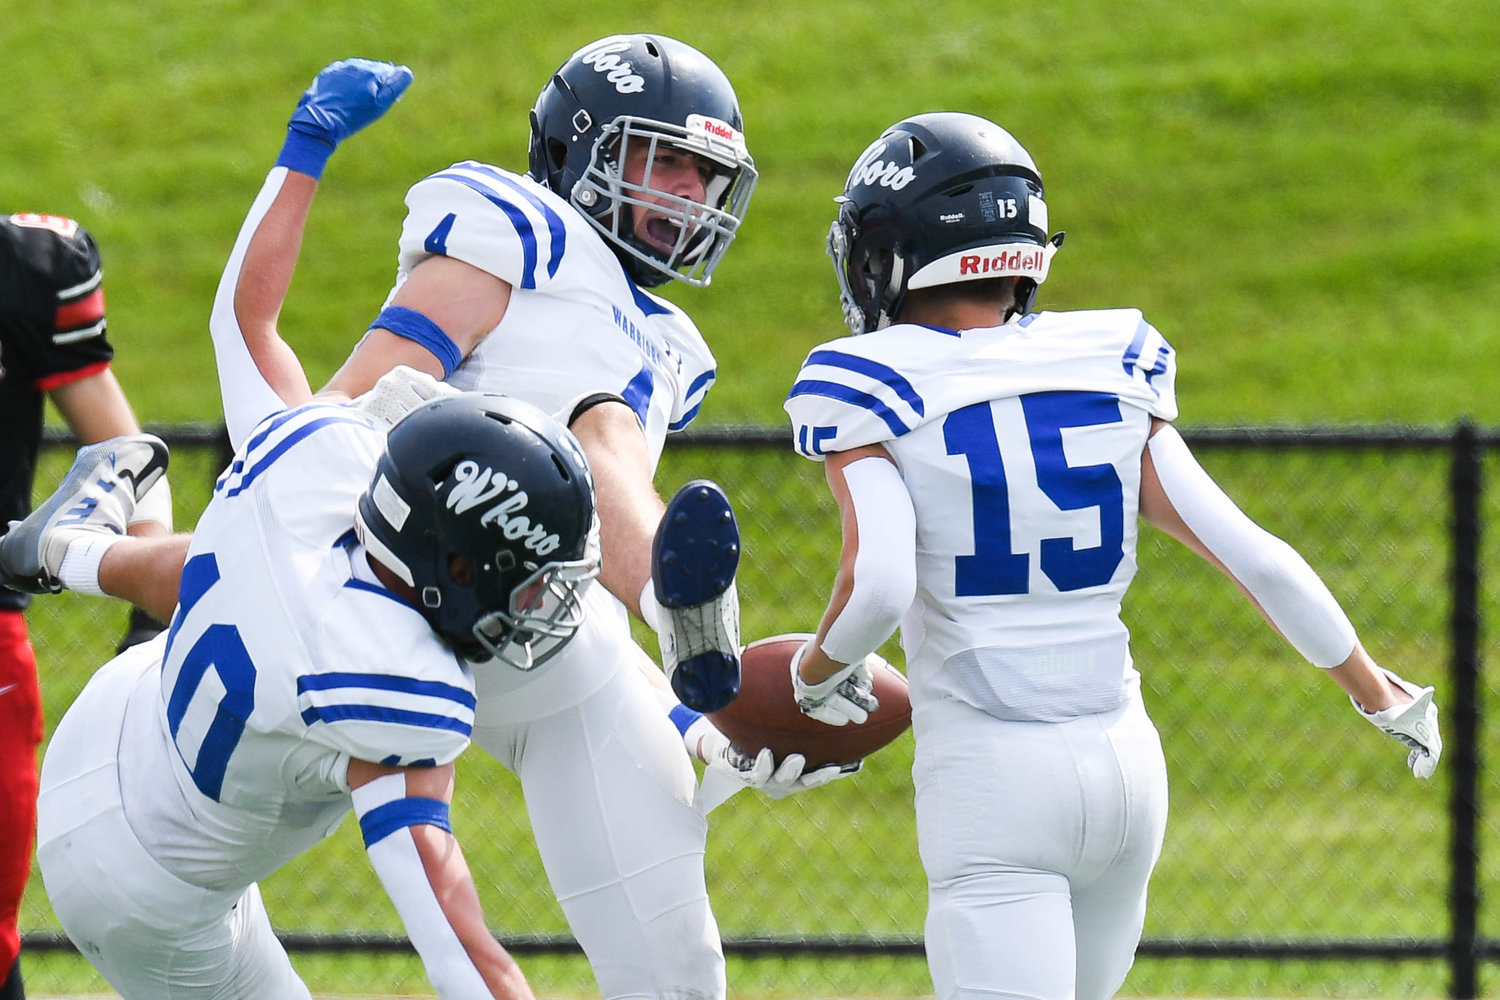 Whitesboro player Anthony Dorozynski, center, celebrates with teammates Joshua Bono (10) and Spencer Cater (15) after scoring a touchdown. Dorozynski finished with 138 yards receiving and touchdown on five catches.